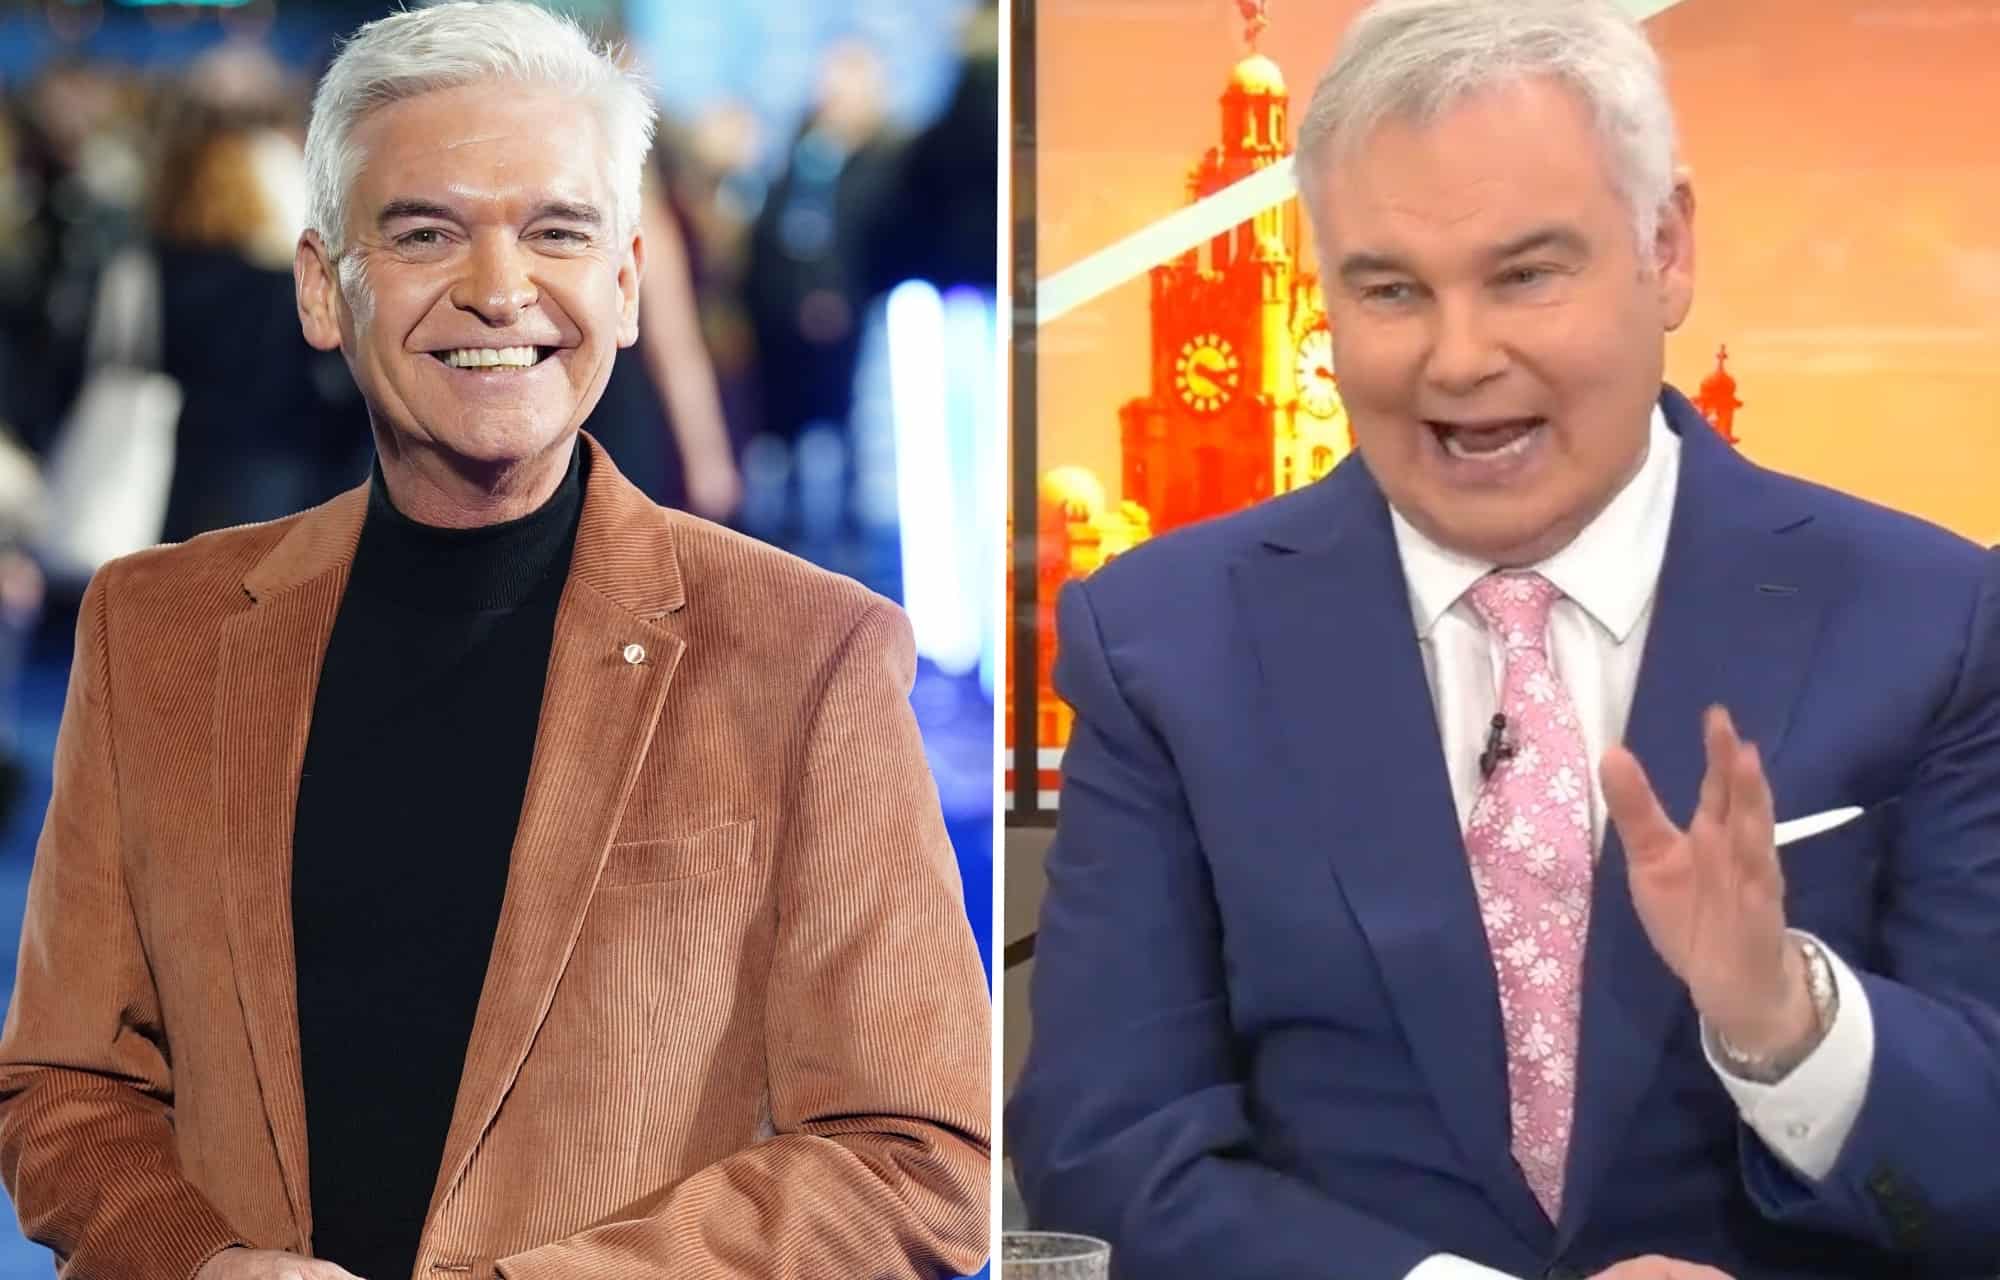 Eamonn Holmes fumes at Holly Willoughby, saying she ‘knows the truth’ about Schofield’s exit